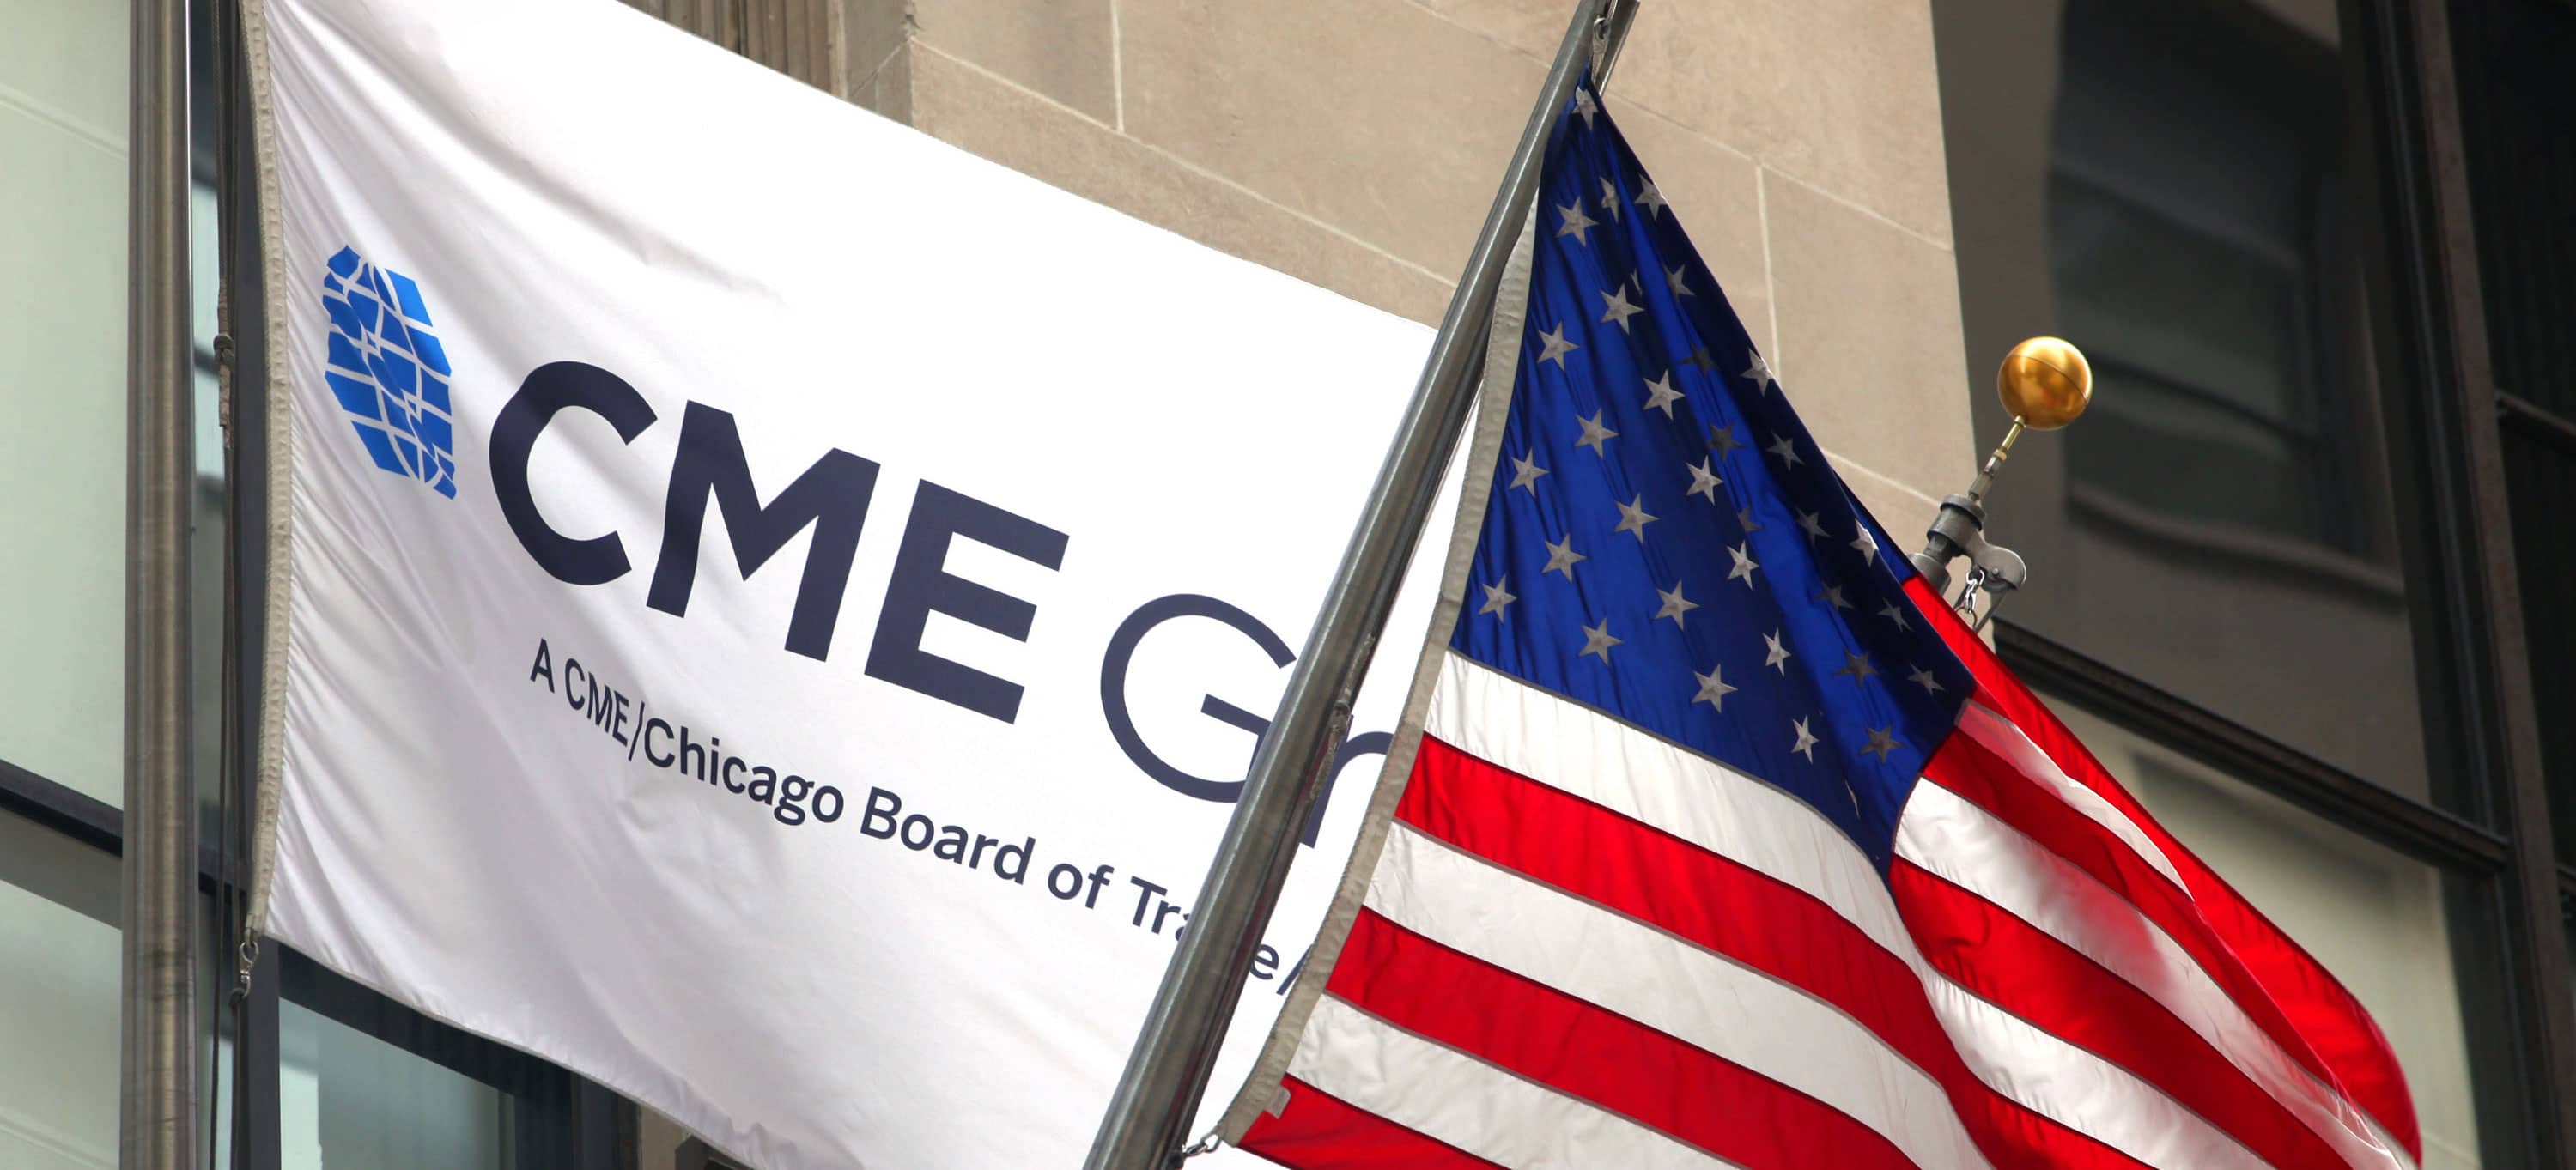 CME Group’s Chicago Trading Floor to Close